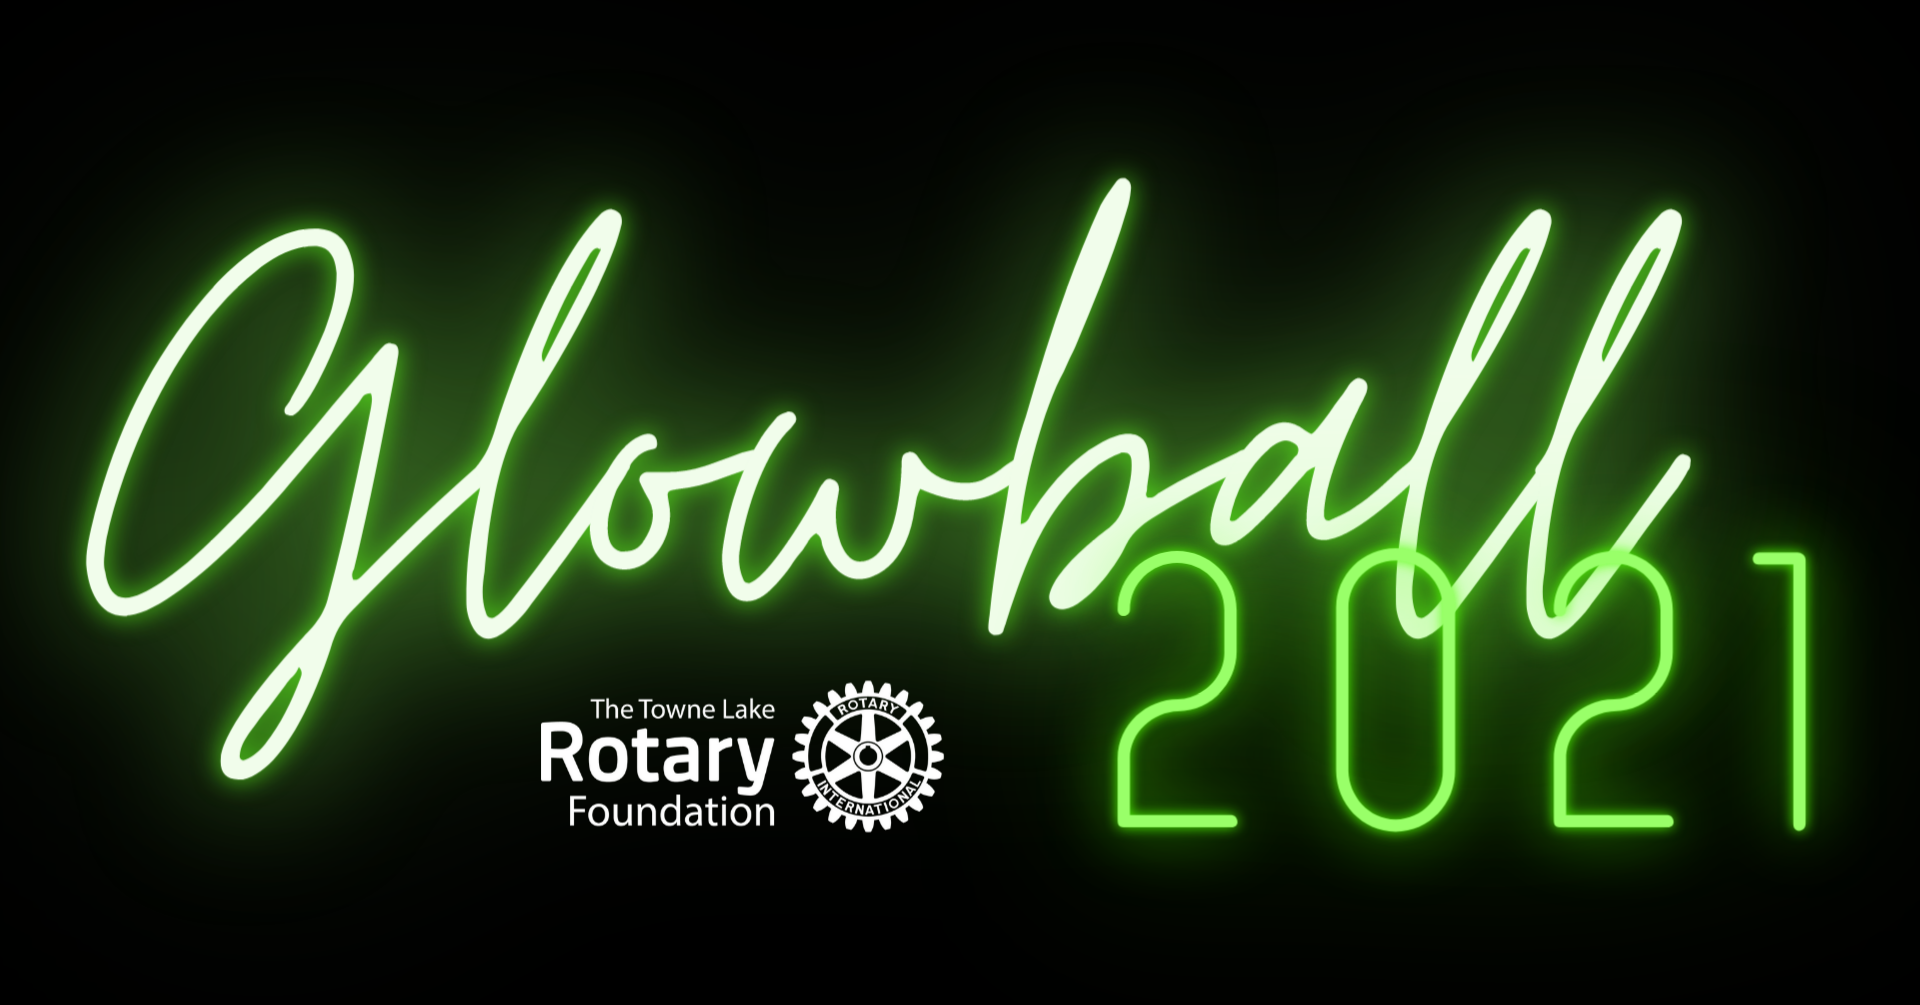 6th Annual Glowball Golf Tournament by the Rotary Club of Towne Lake